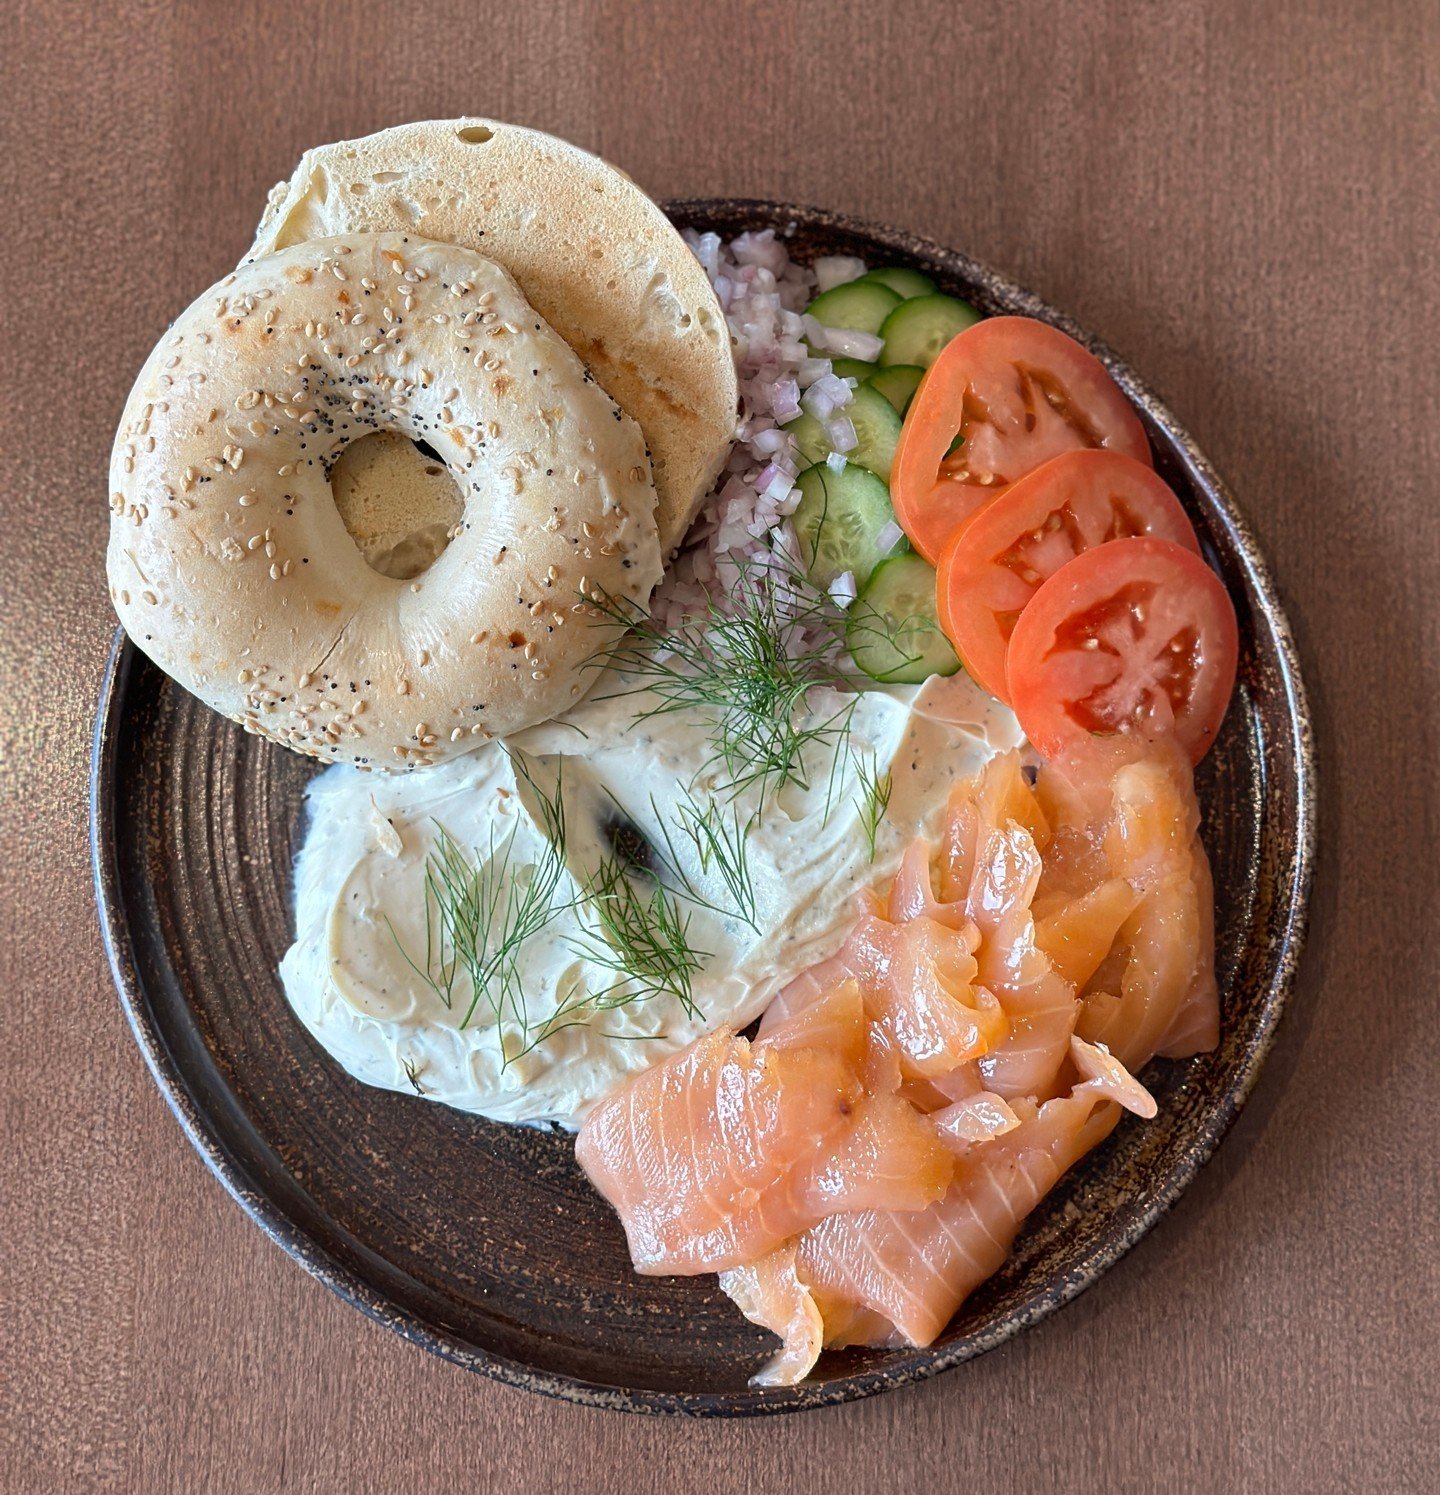 Lox + Bagel, anyone?�

Dive into the exquisite flavors of house-cured salmon, delicately paired with fresh capers and creamy cream cheese, all nestled within a wholesome bagel.